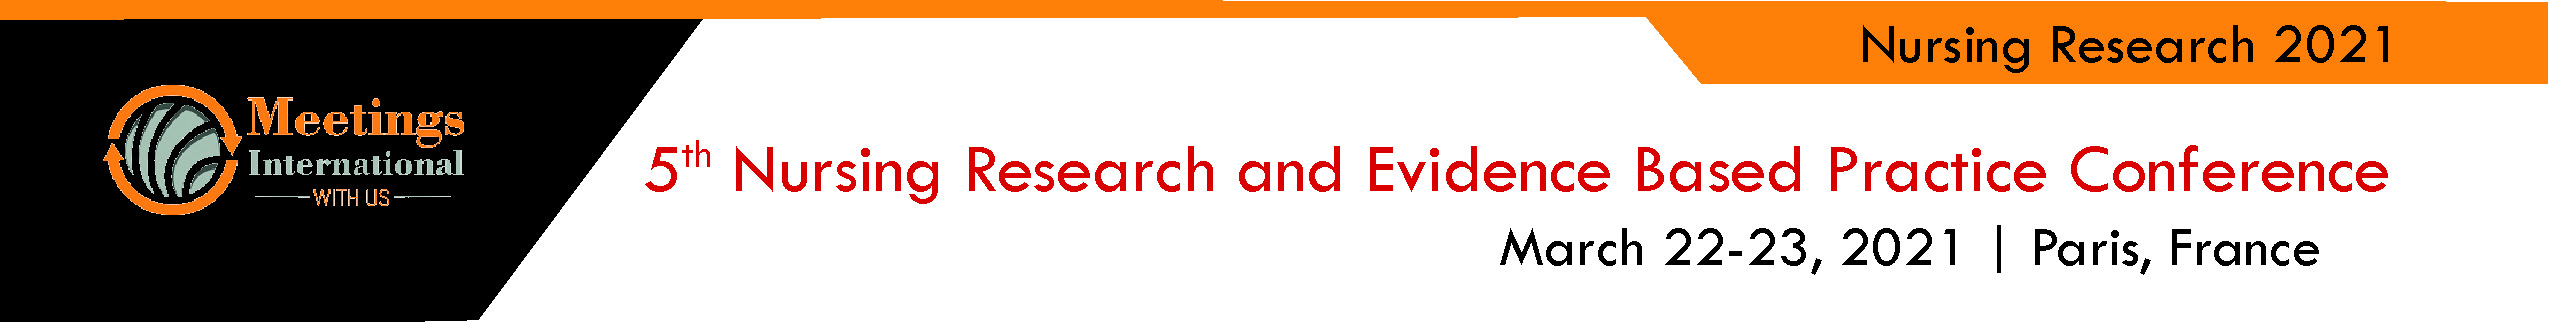 5th Nursing Research and Evidence Based Practice, Paris, France